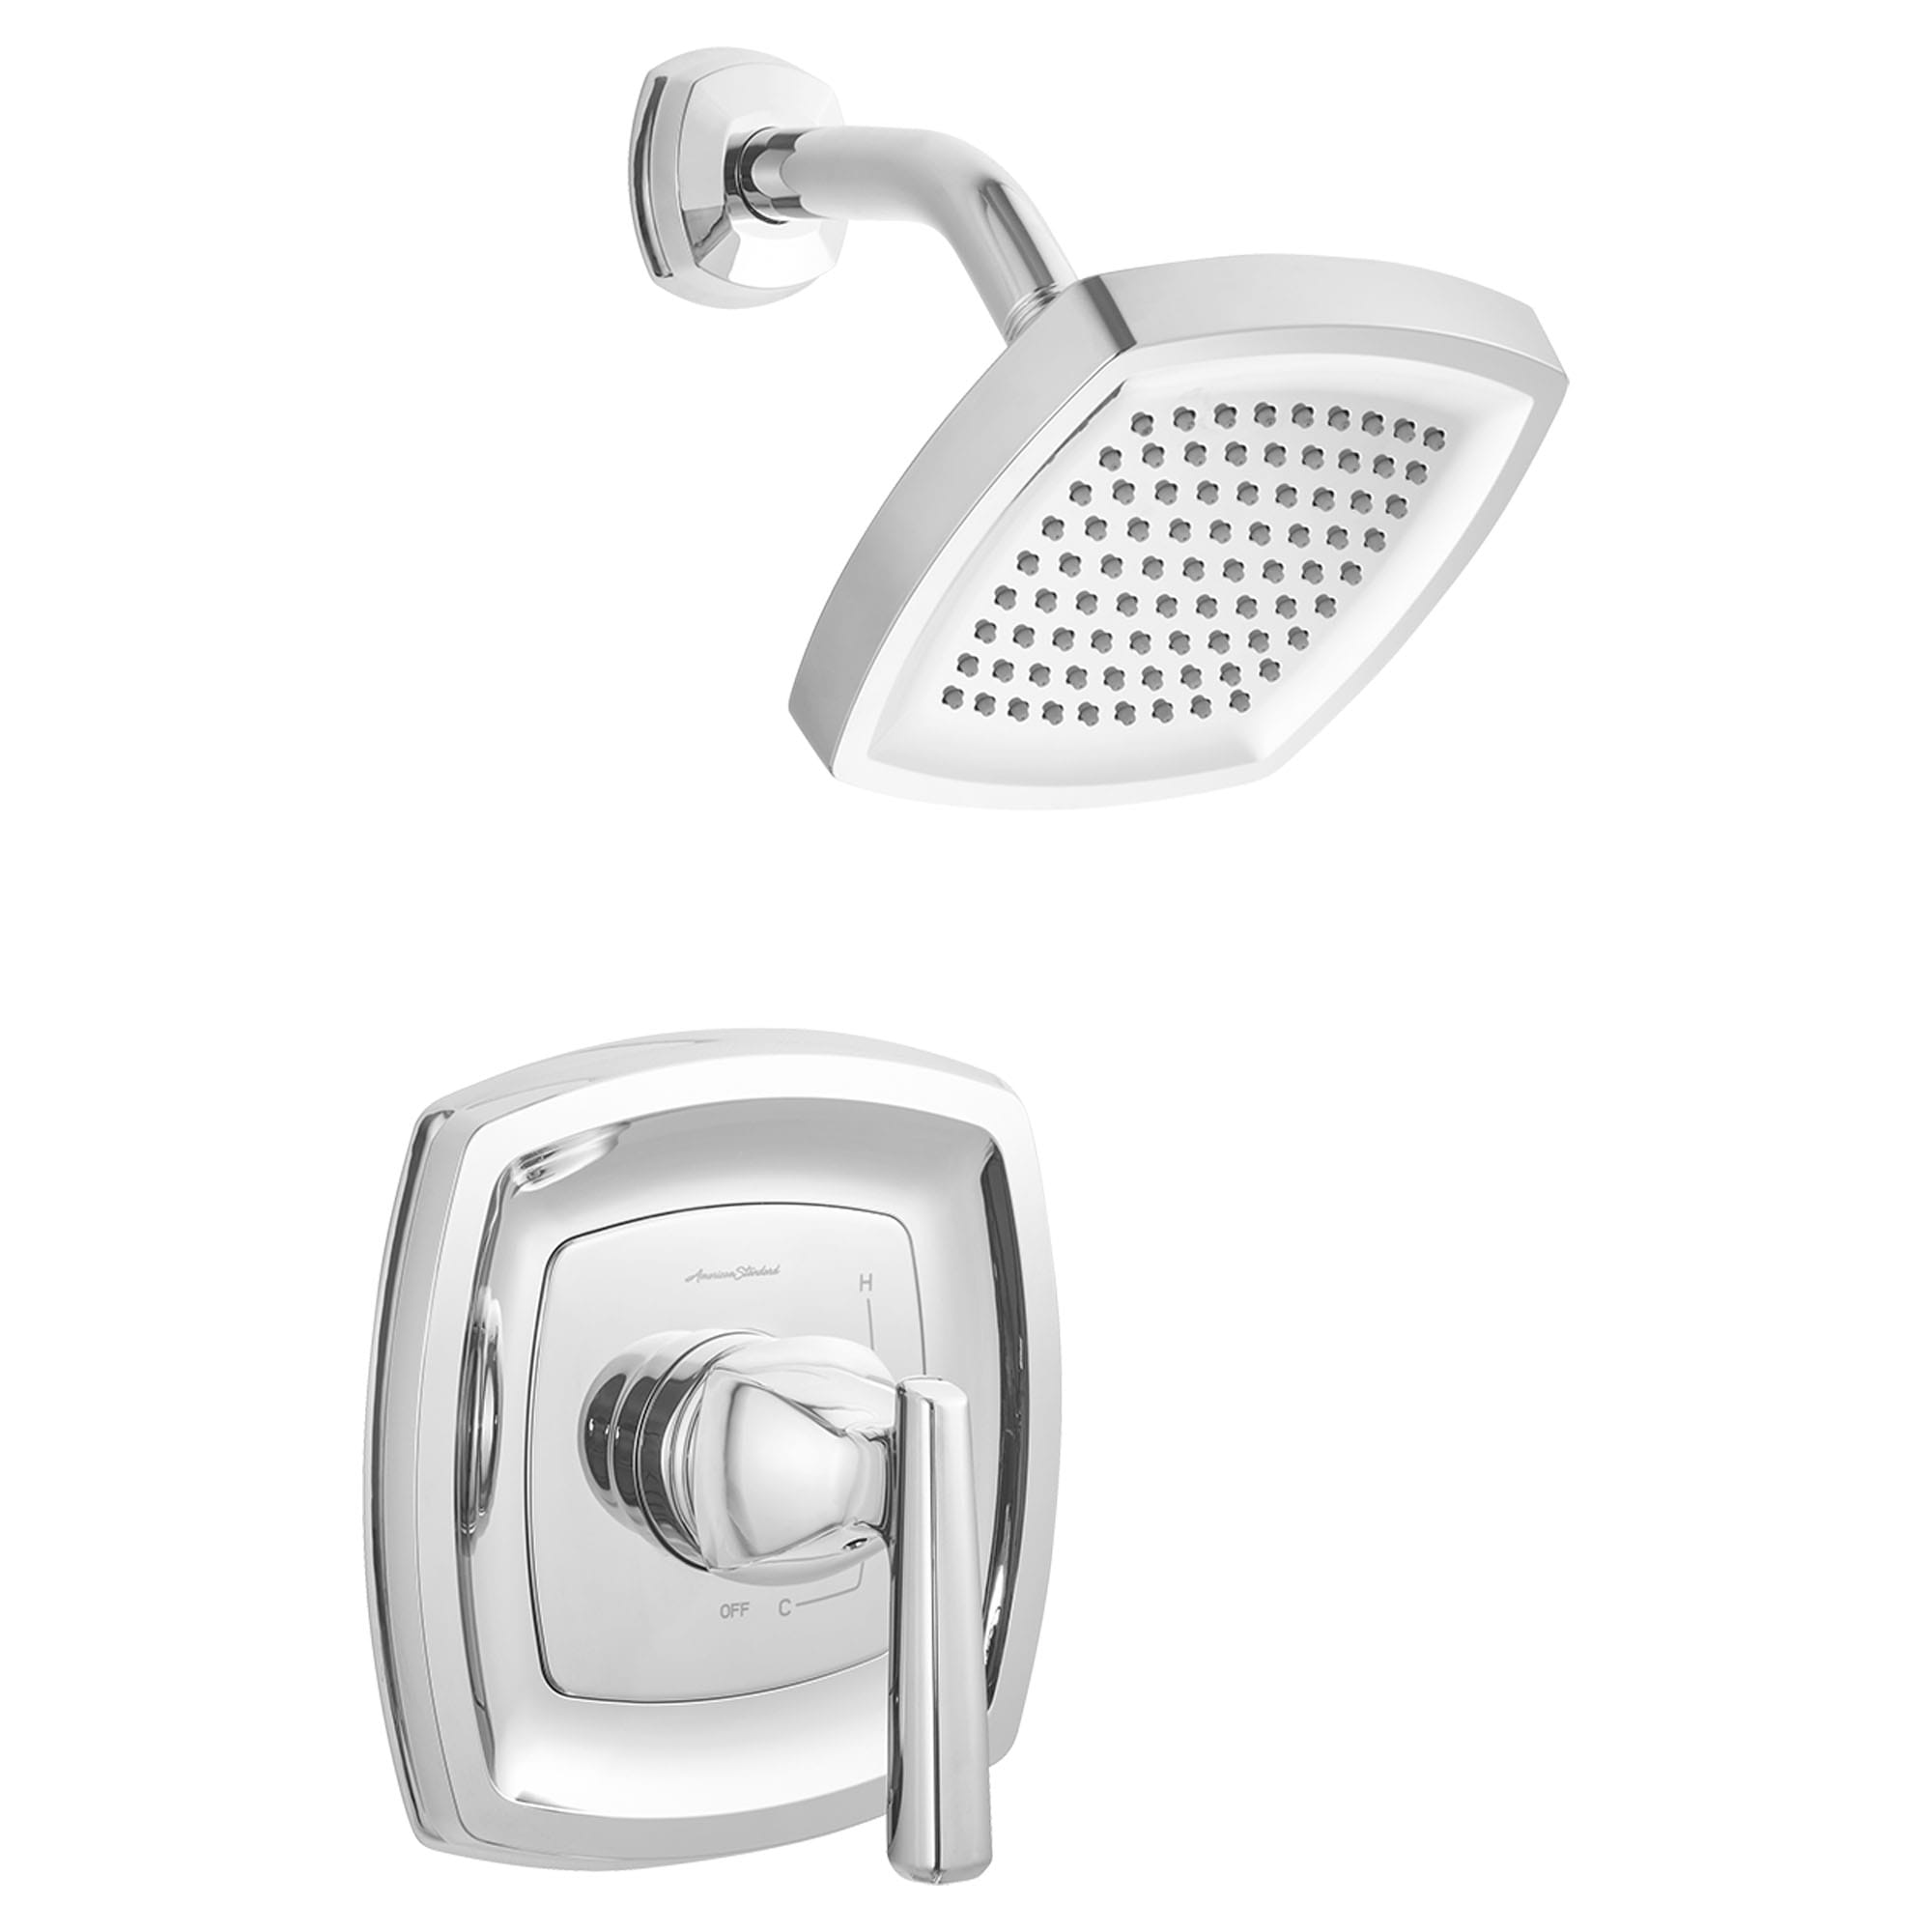 Edgemere 2.5 GPM Shower Trim Kit with Lever Handle